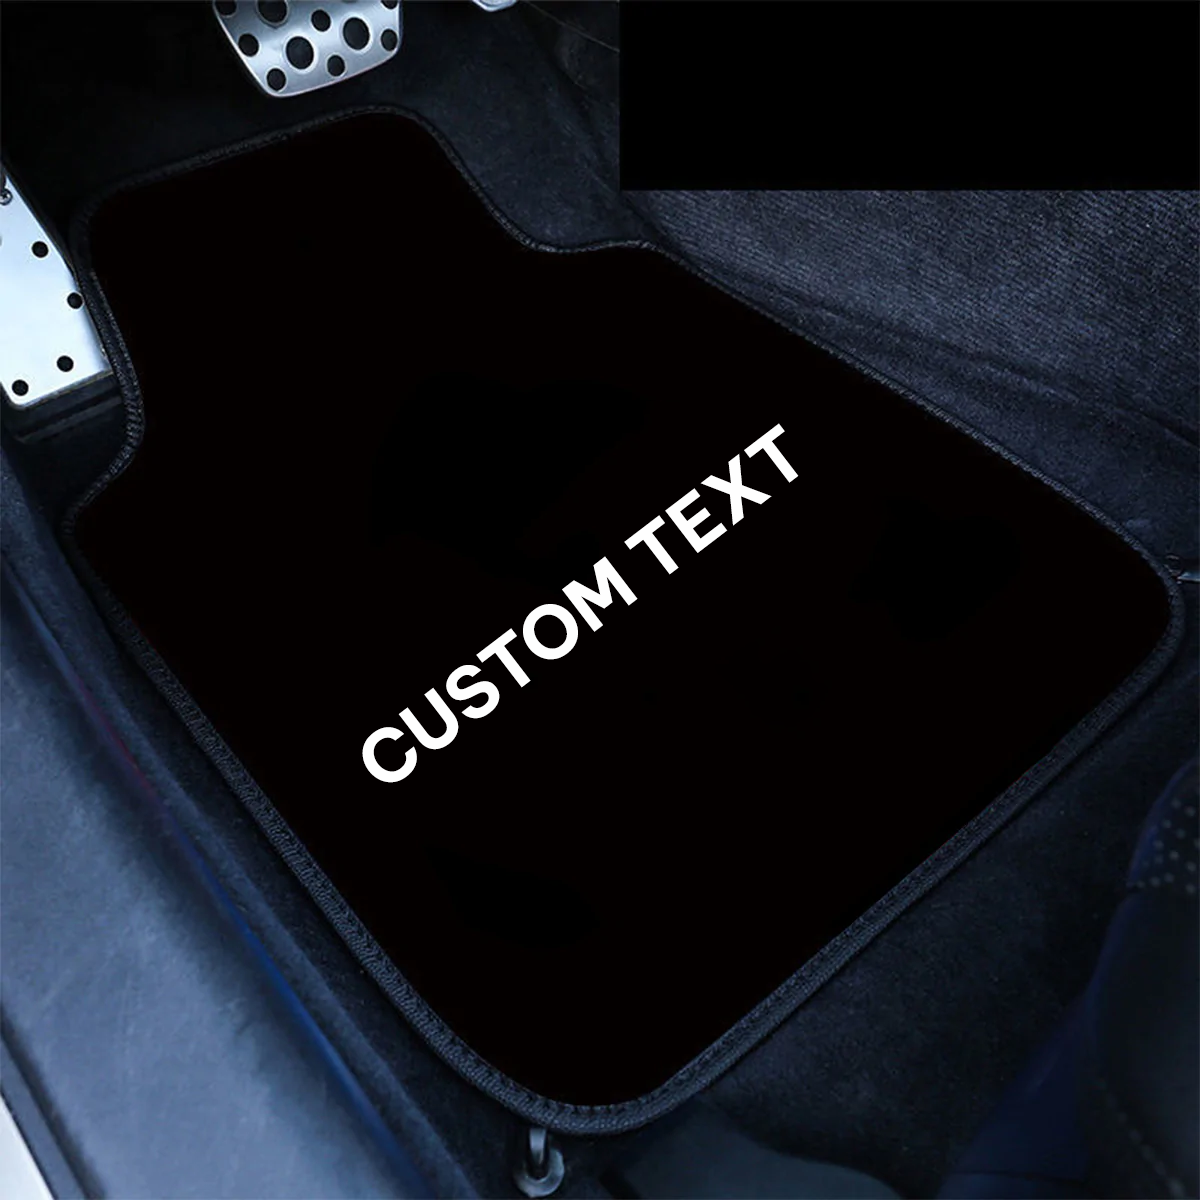 Custom Text For Carpet Floor Mats Set of 4pcs, Compatible with All Cars, Fit Car Floor Mats, All Weather Protection, Universal Type NS13984